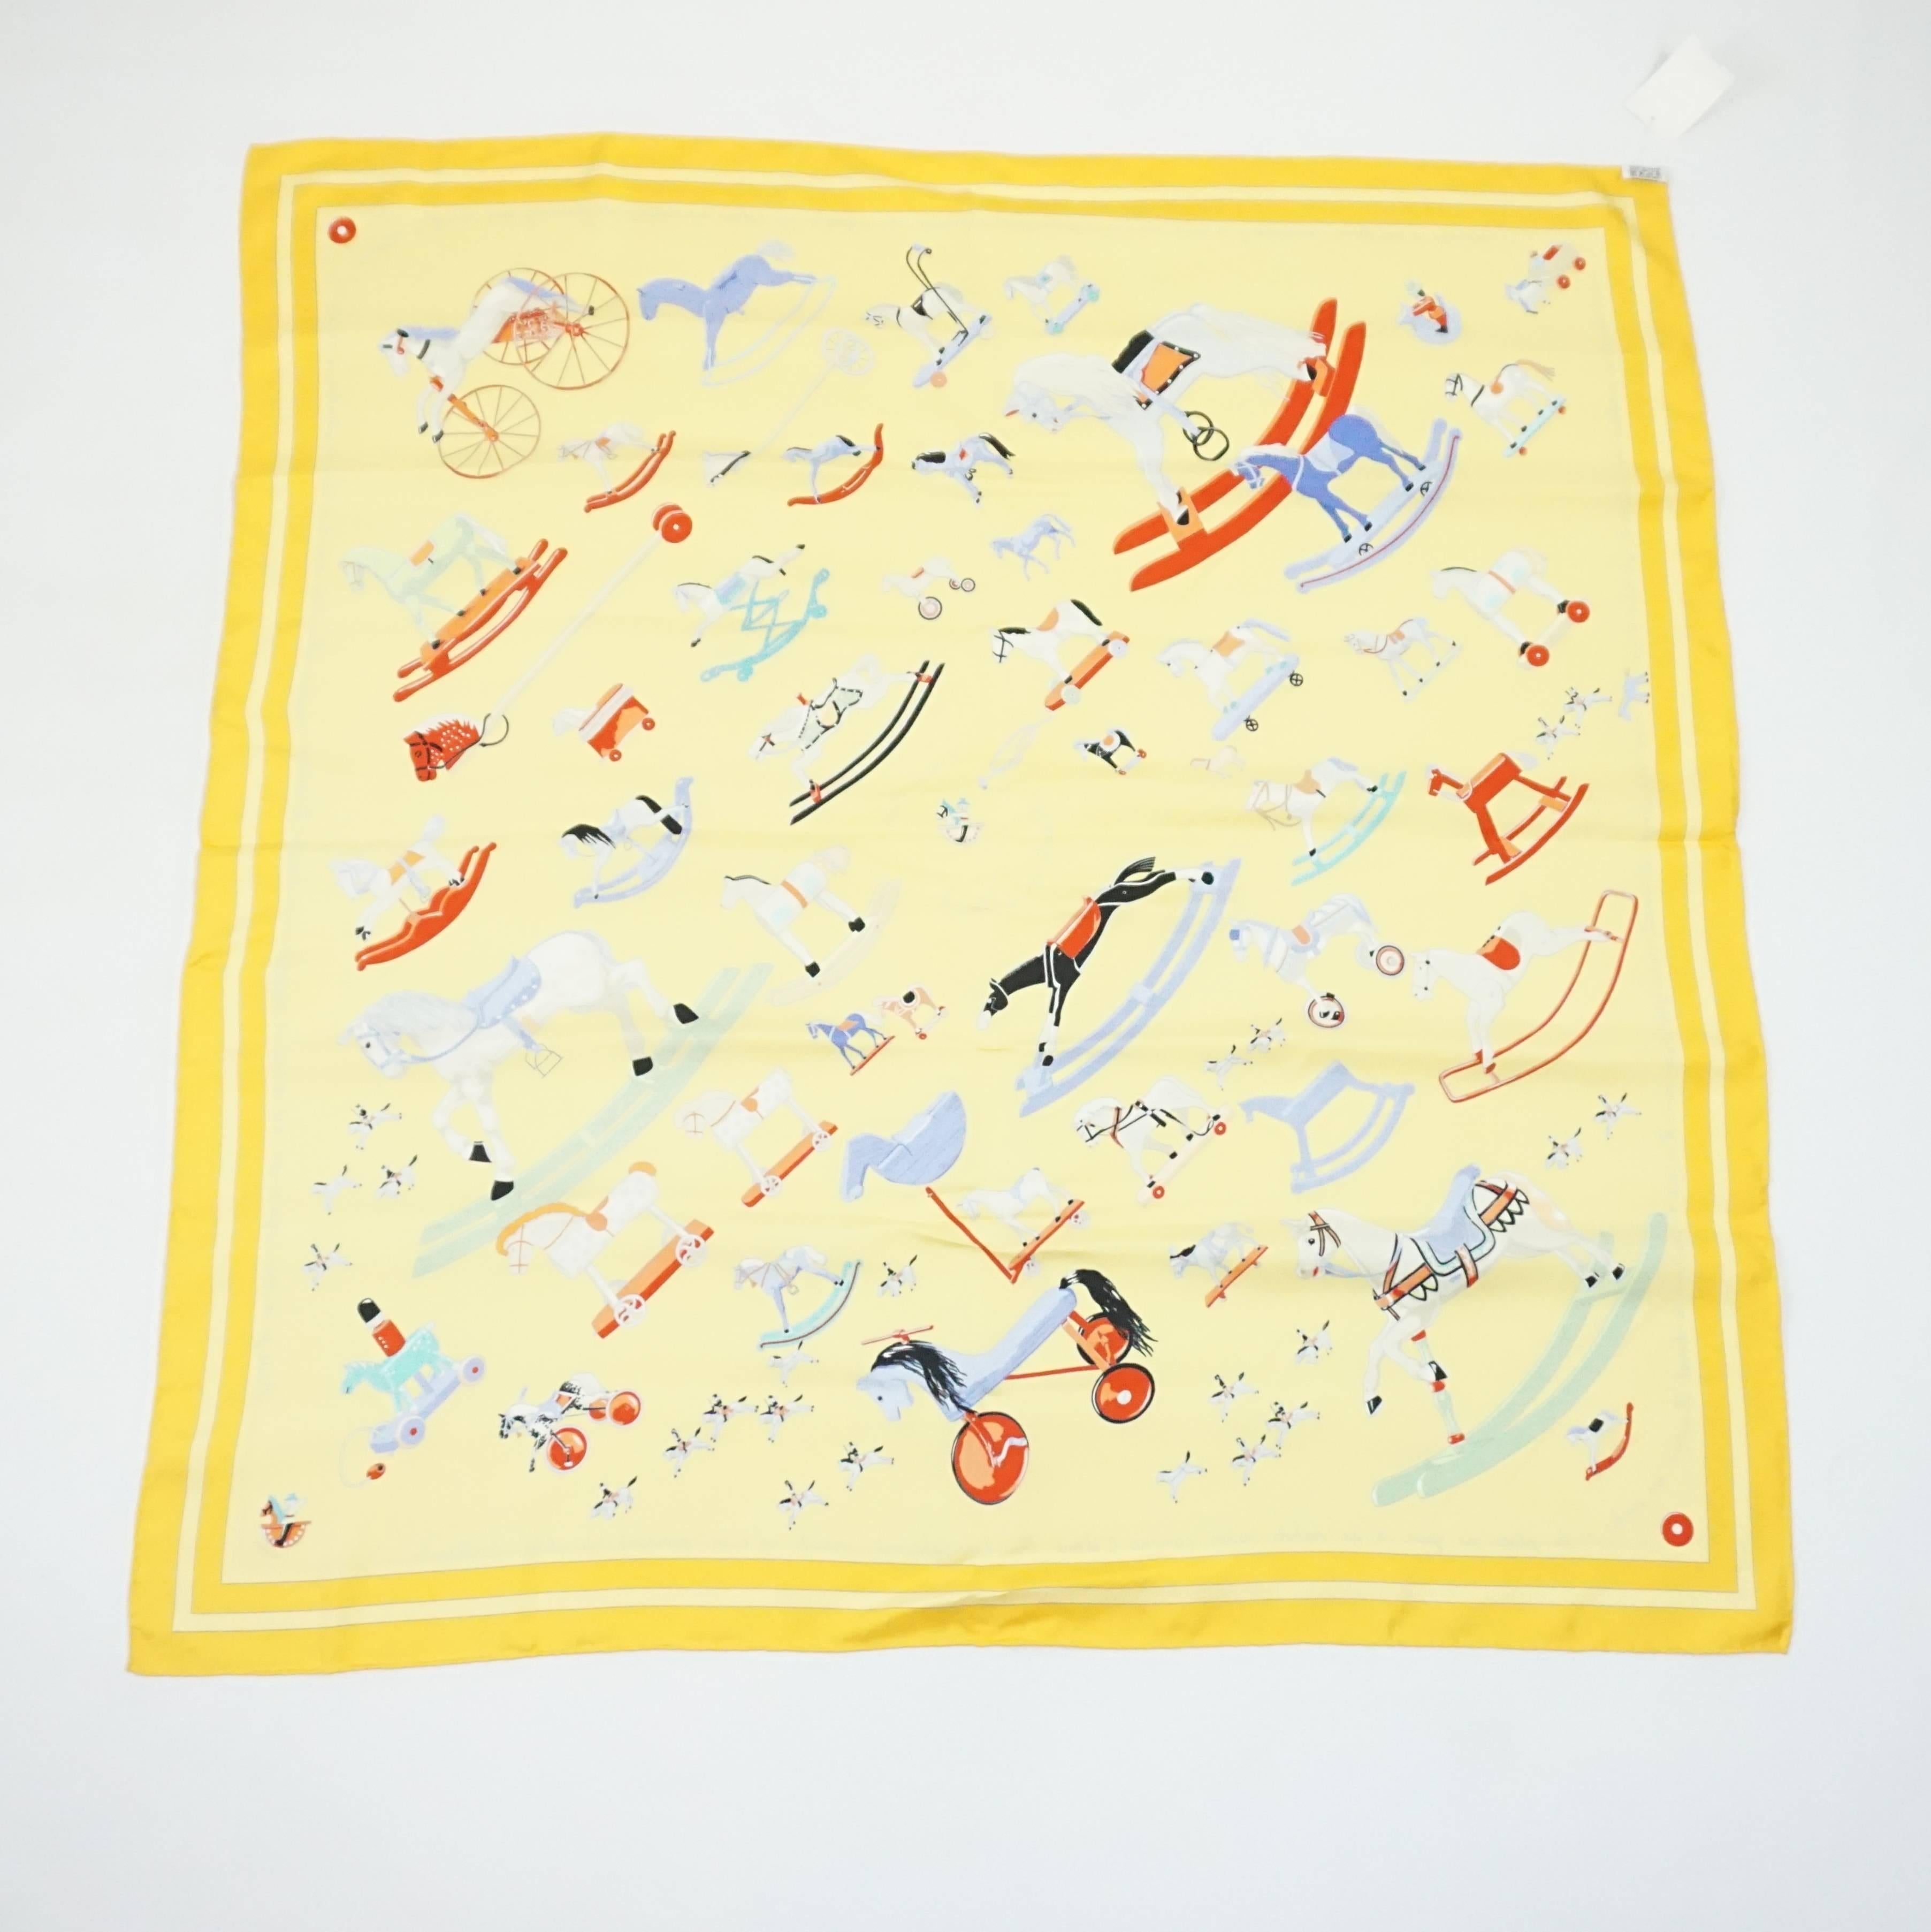 This Hermes scarf is a bright yellow with a multi color rocking horse print on it. The theme is "Raconte-moi le Cheval" and it is in excellent condition with light wear.

Measurements
Length: 35"
Width: 35" 
